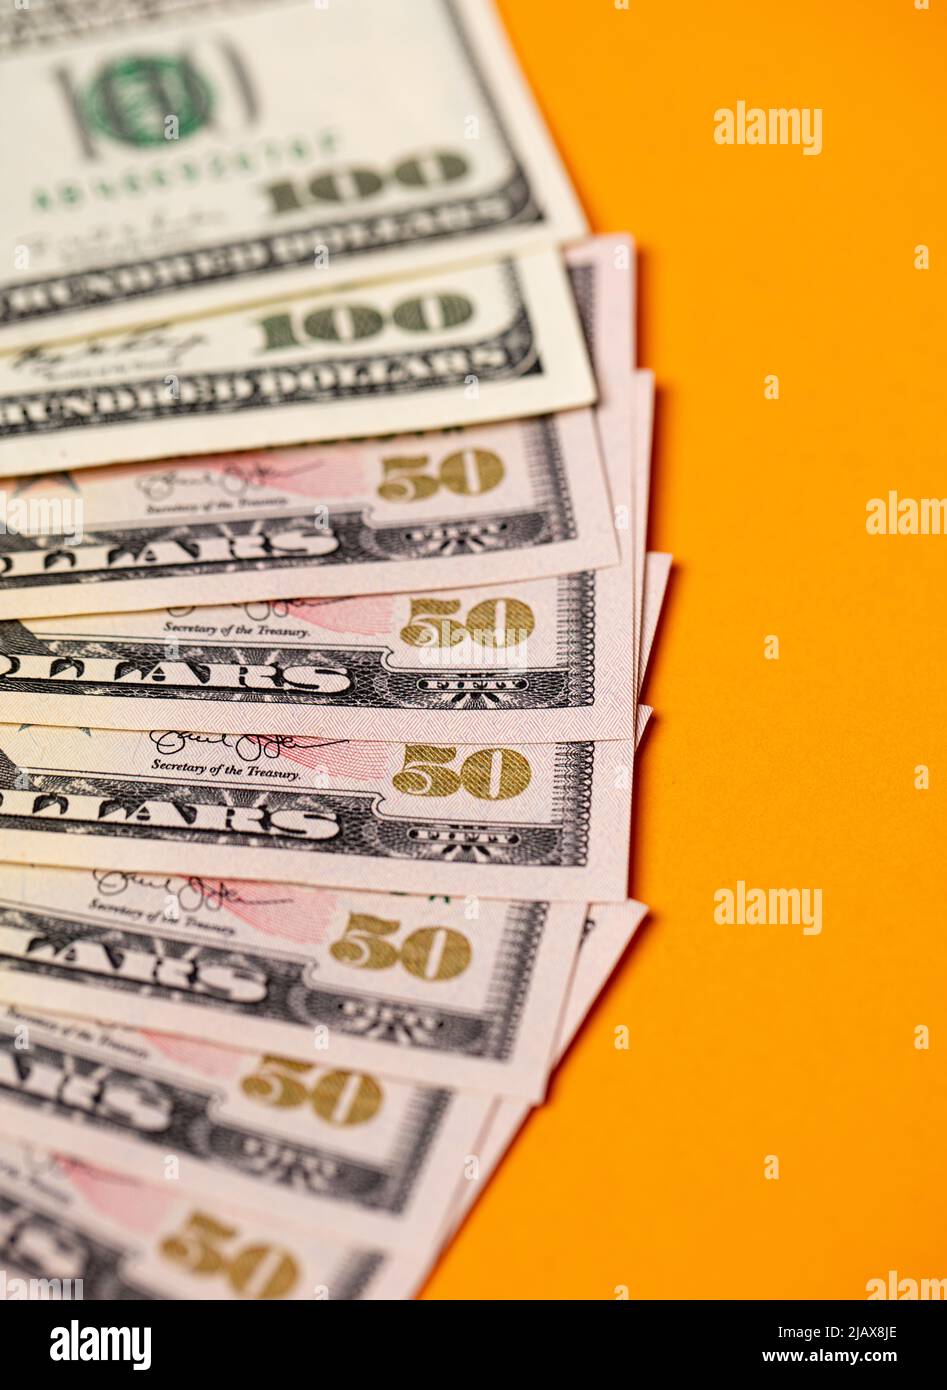 Spread out fifty dollar banknotes, one hundred dollar bills on top. Orange background behind USD currency Stock Photo